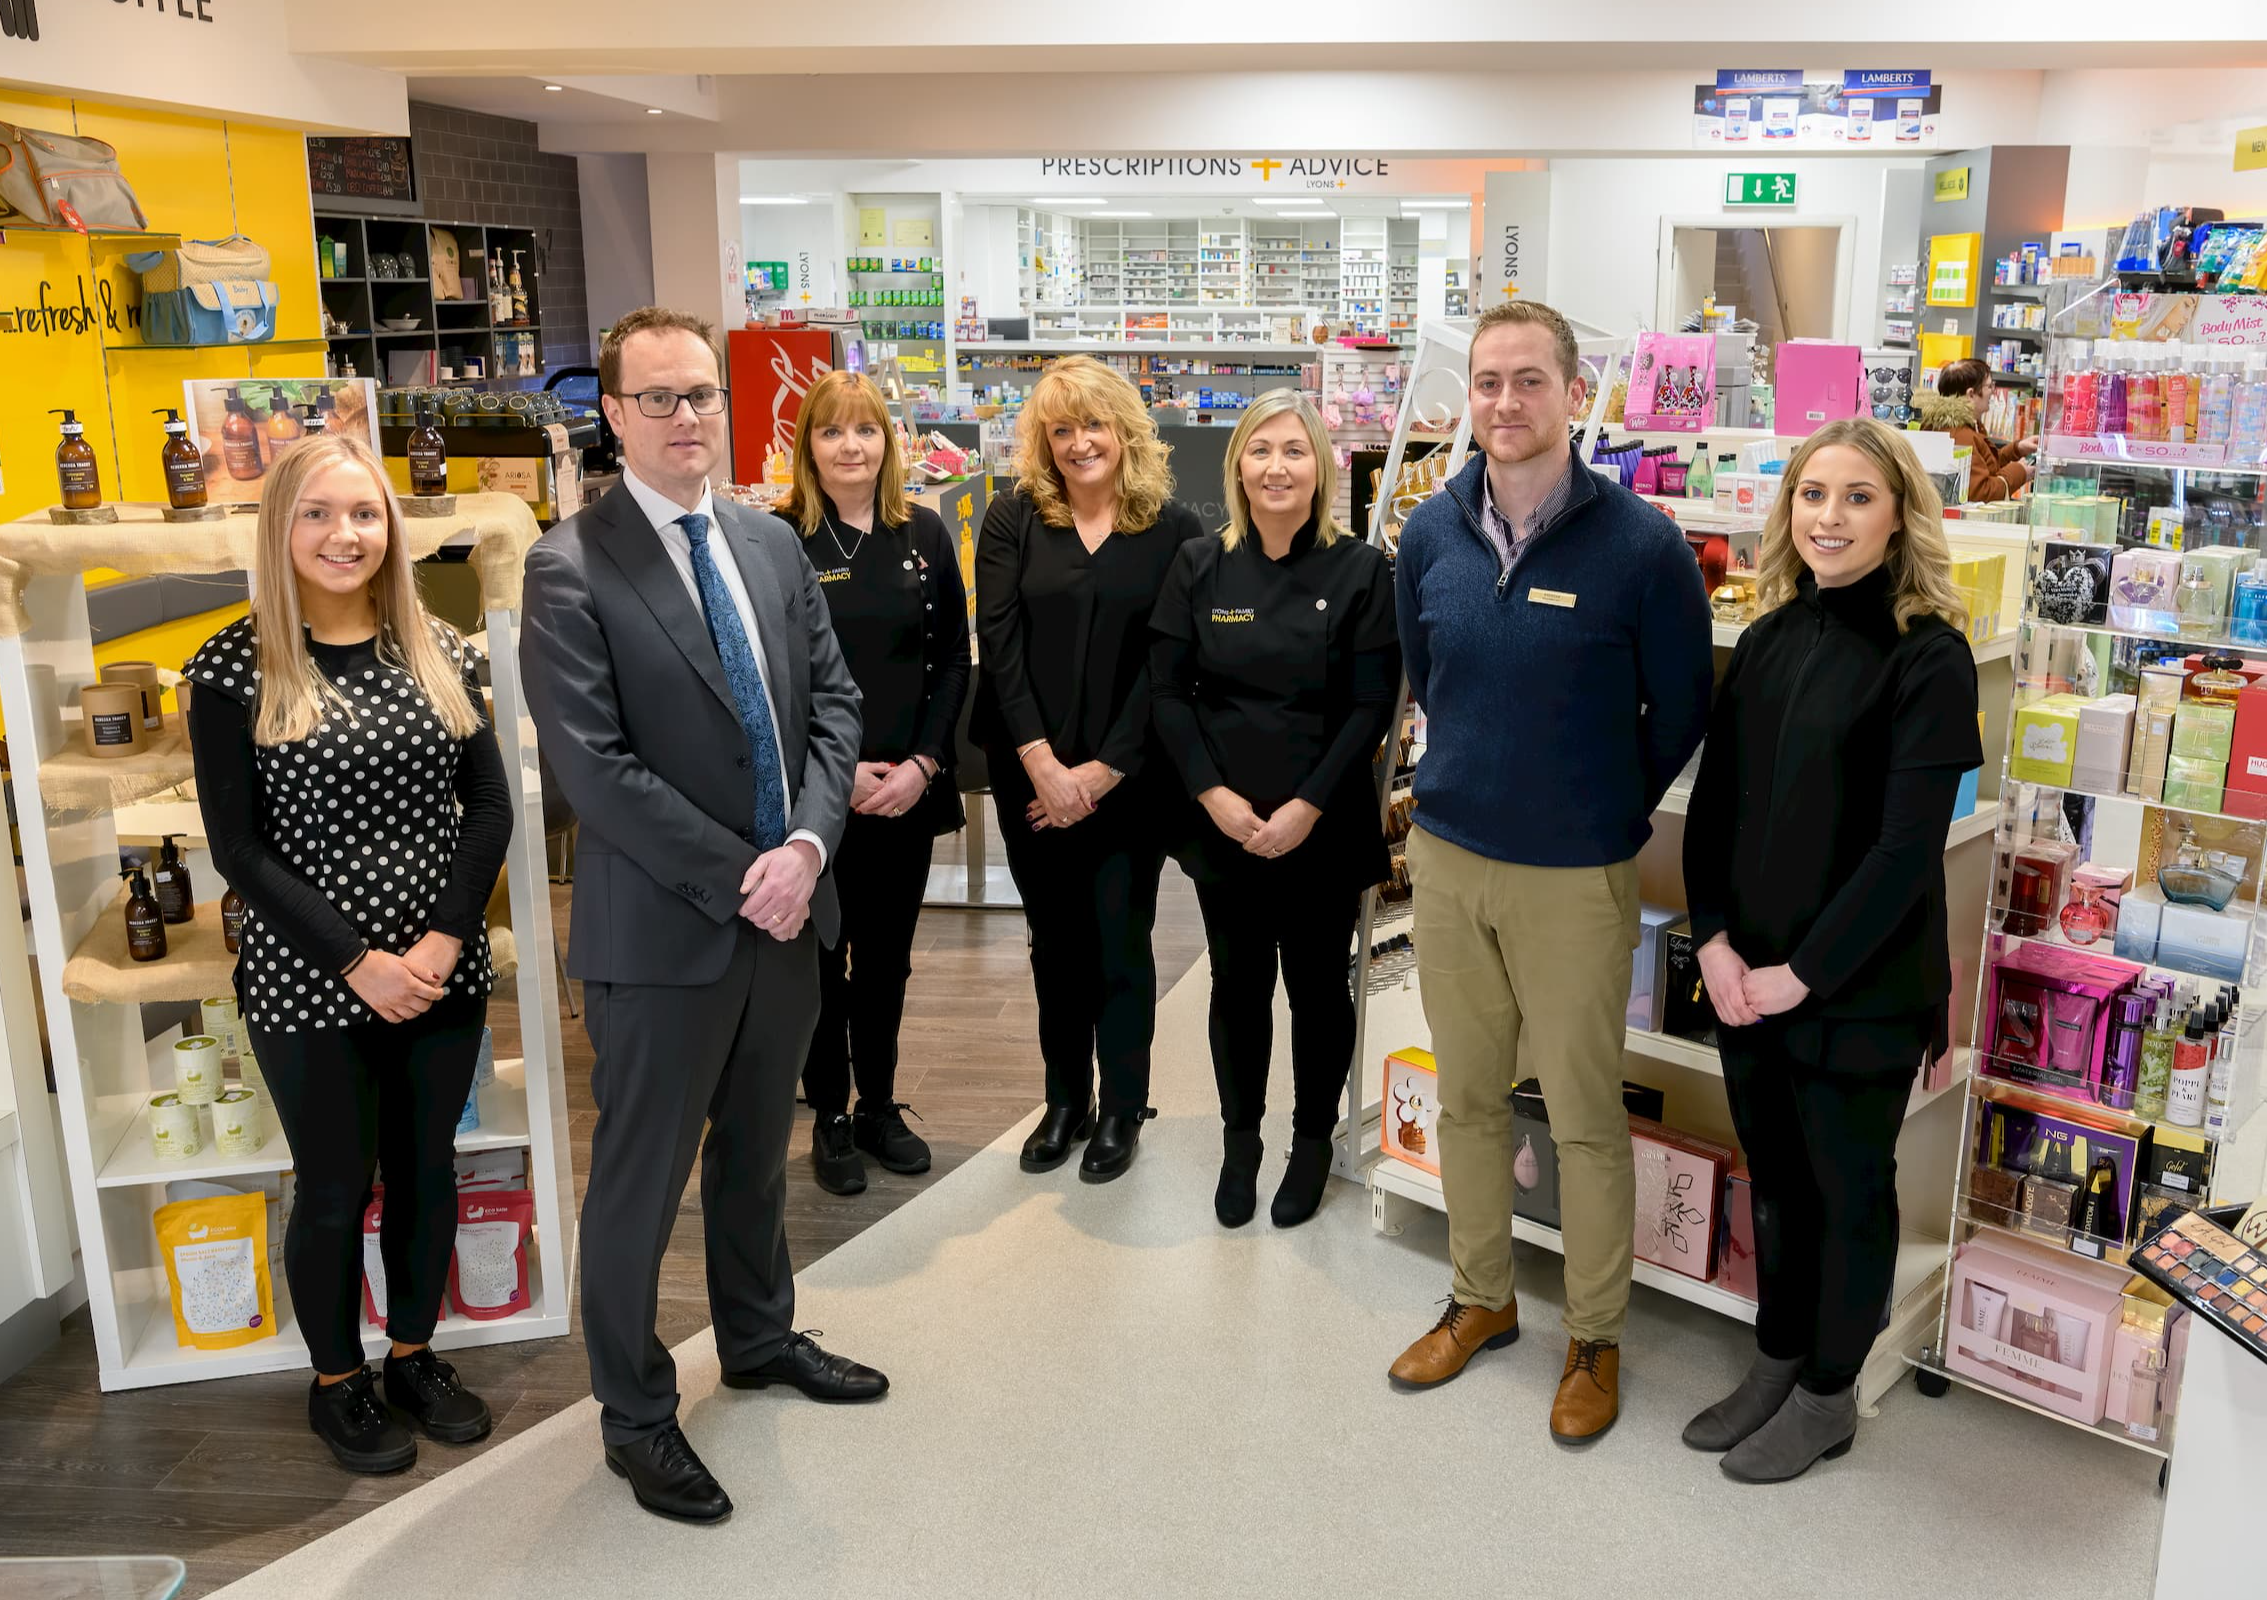 10 top female fragrances available in Laois Pharmacy this year - Laois Today